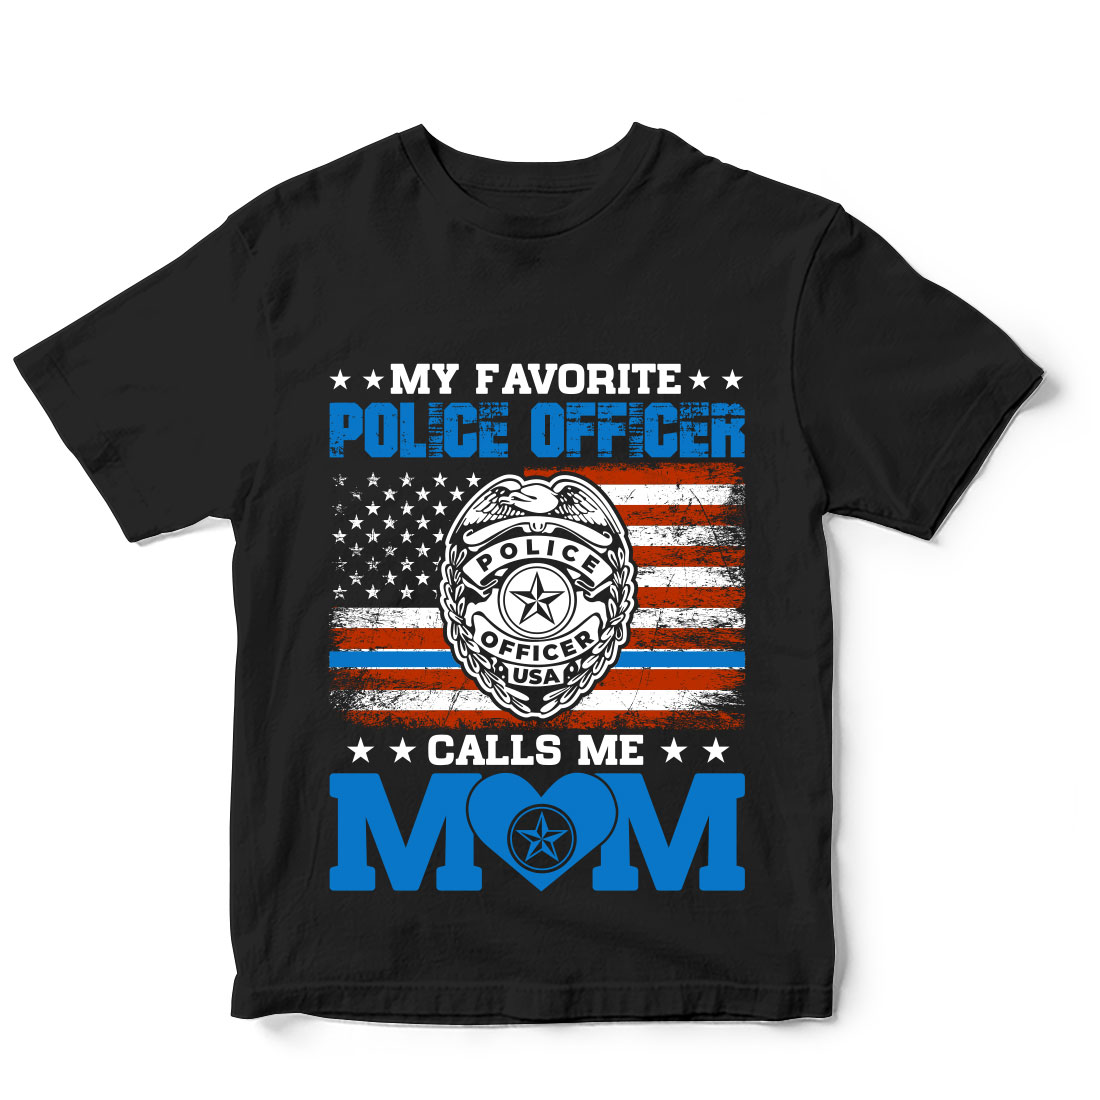 Police officer mom shirt with an american flag.